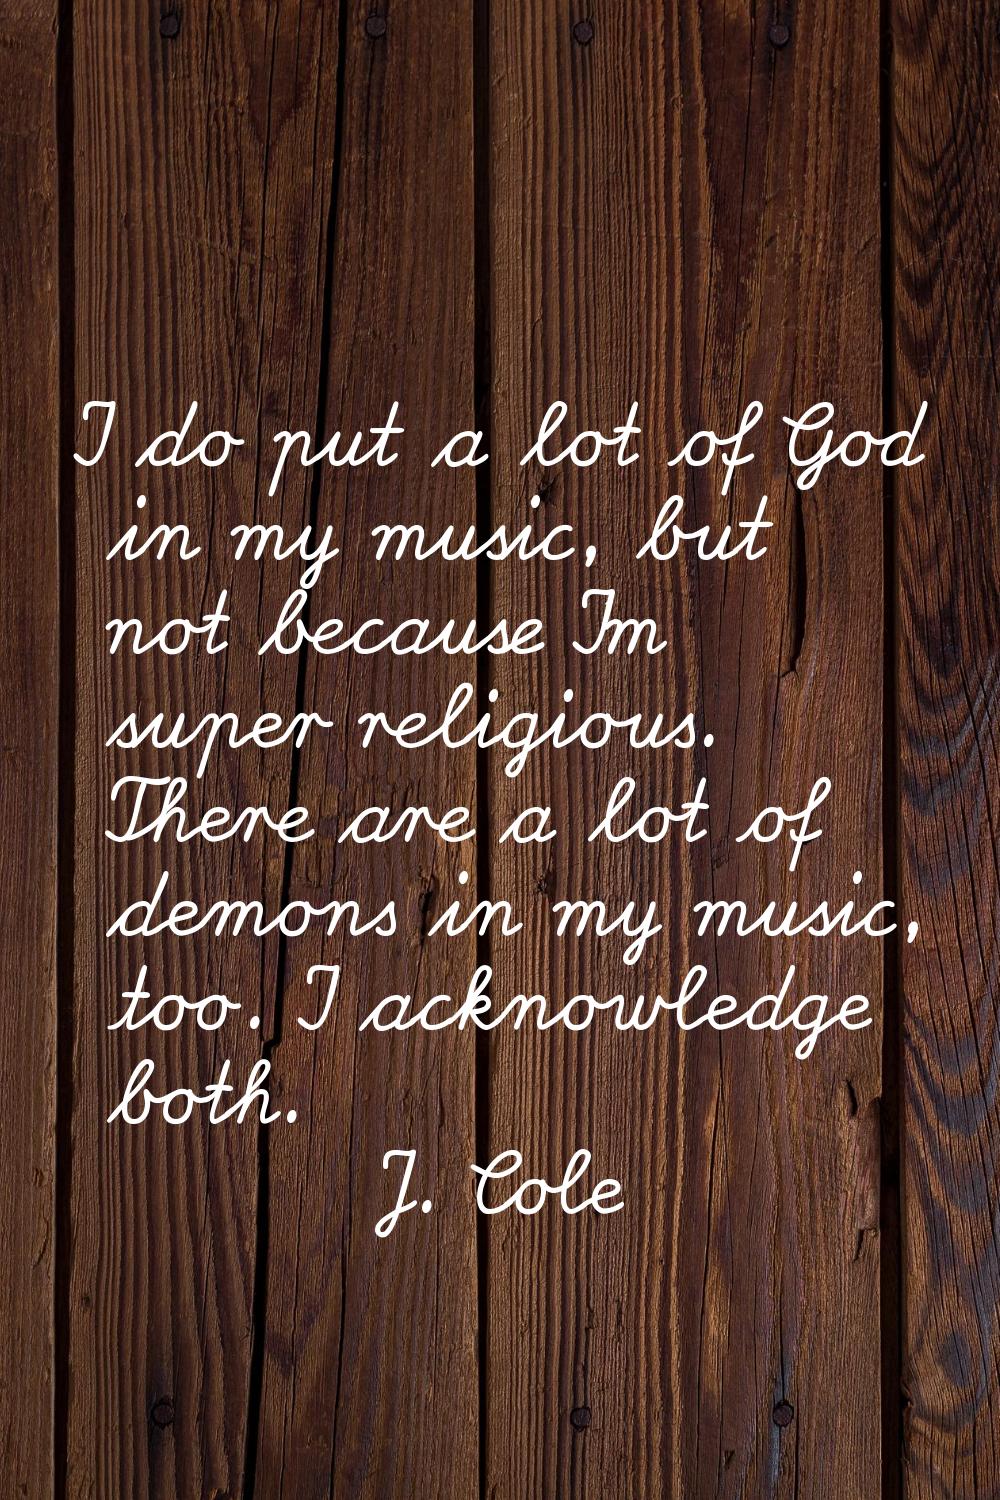 I do put a lot of God in my music, but not because I'm super religious. There are a lot of demons i